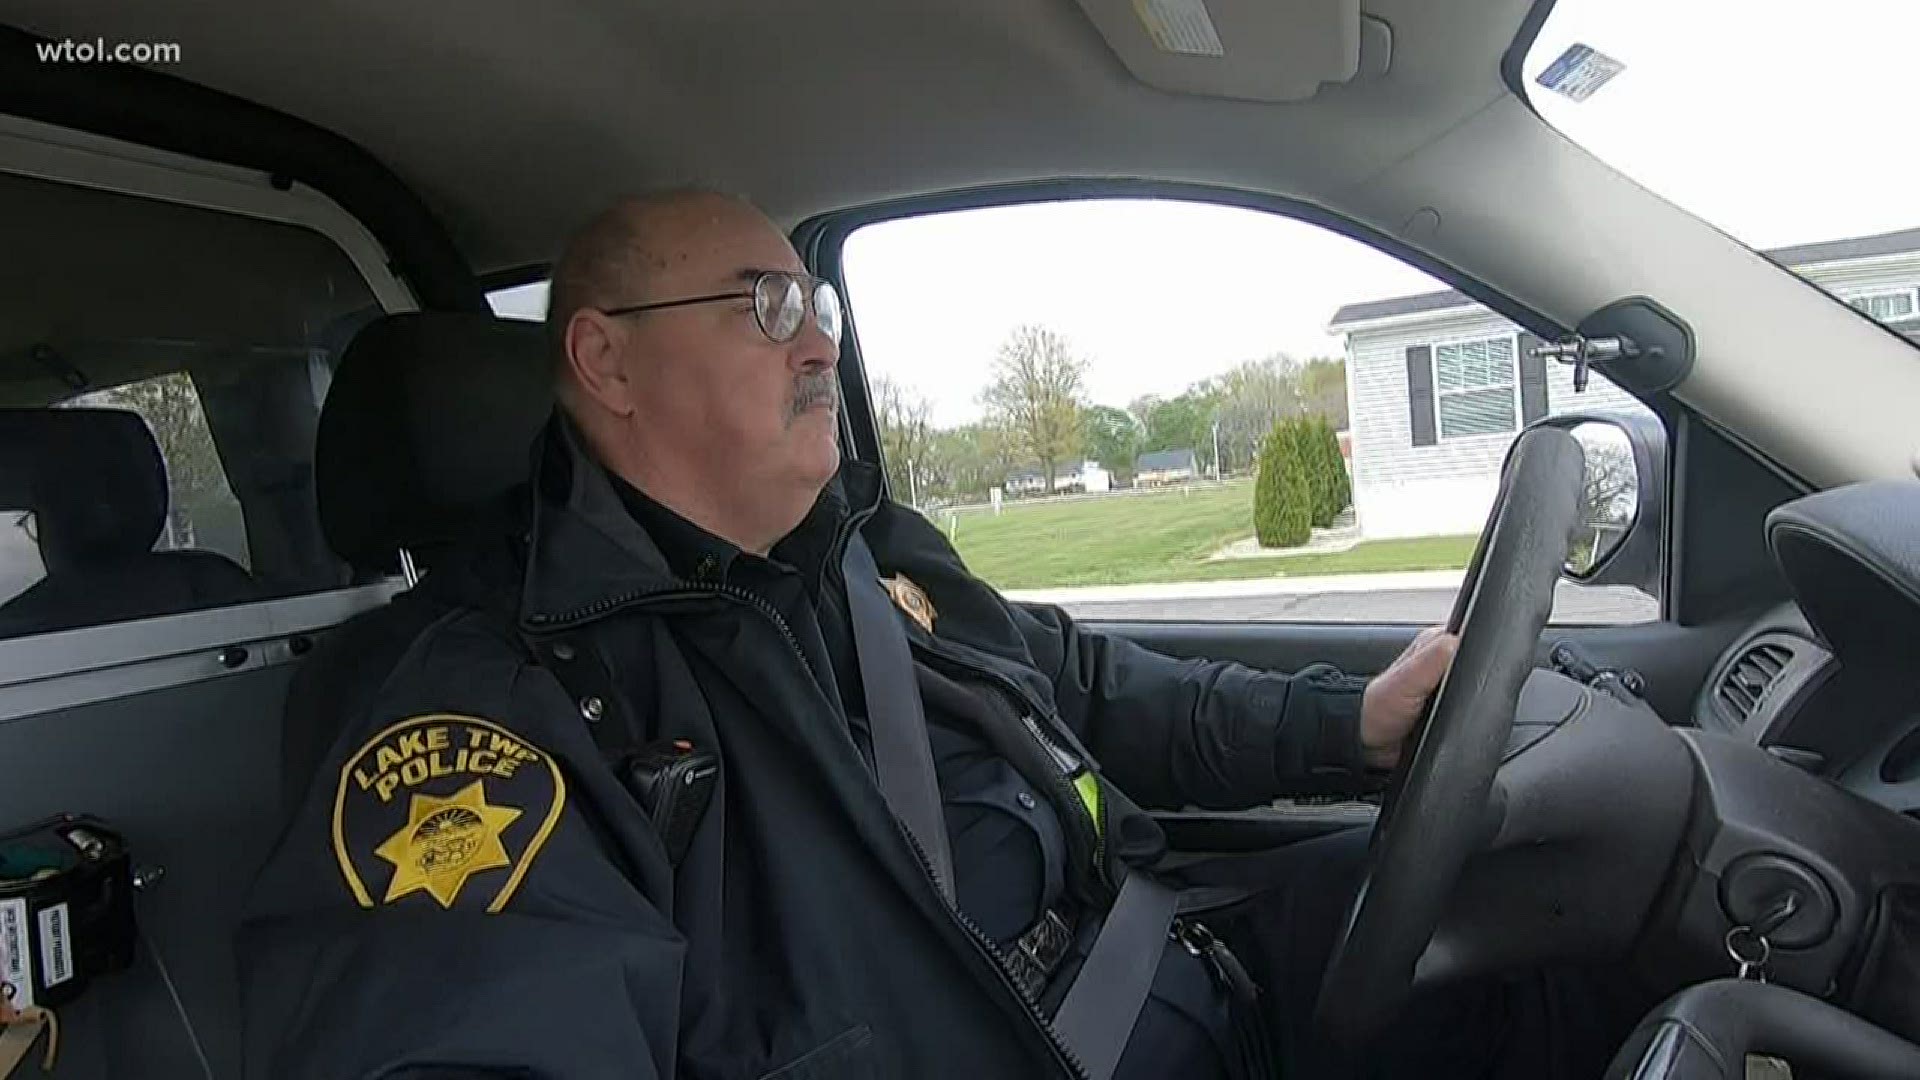 63-year-old Ron Craig has spent his life helping others and taking on different roles as a first responder.  Now, in retirement, he volunteers with Lake Twp. PD.